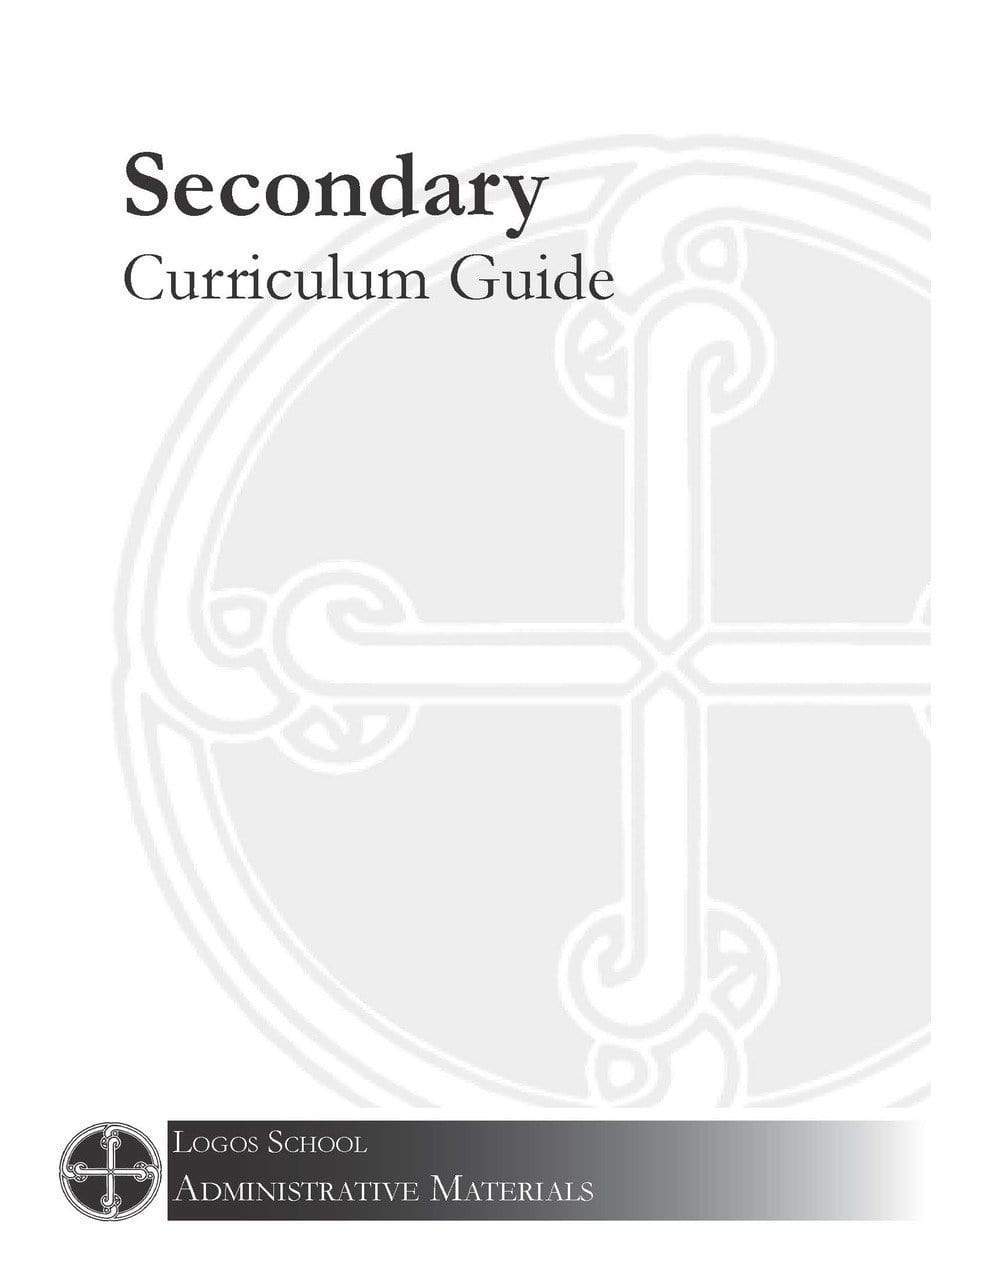 Complete Secondary Curriculum Guide (Download)